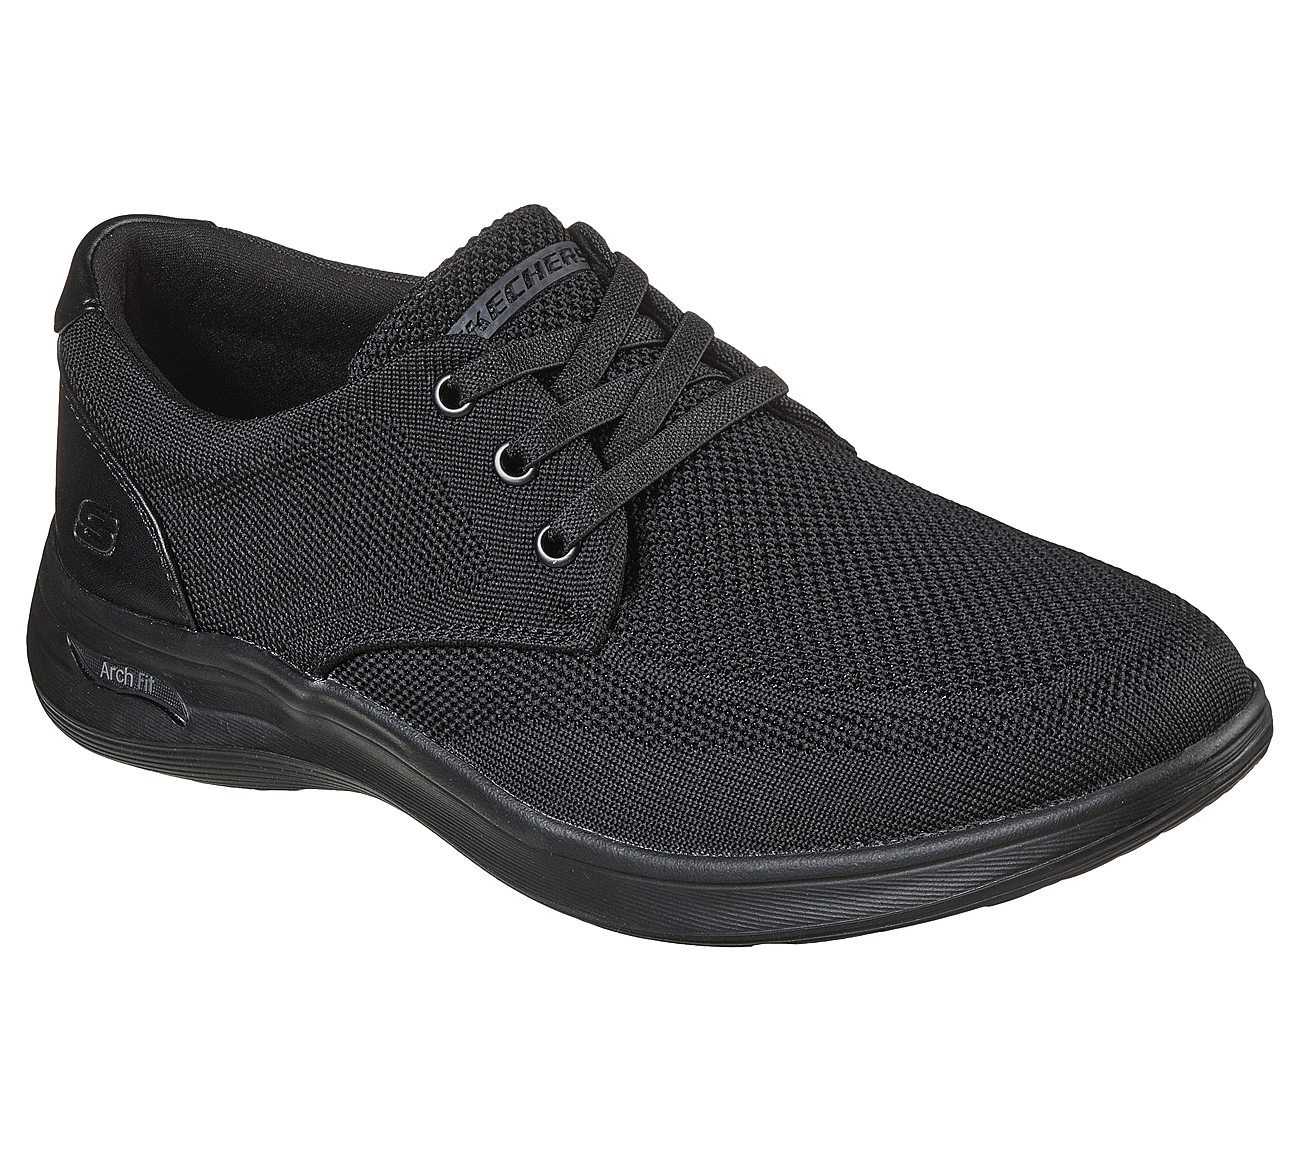 ARCH FIT DARLO - WEEDON, BBLACK Footwear Lateral View